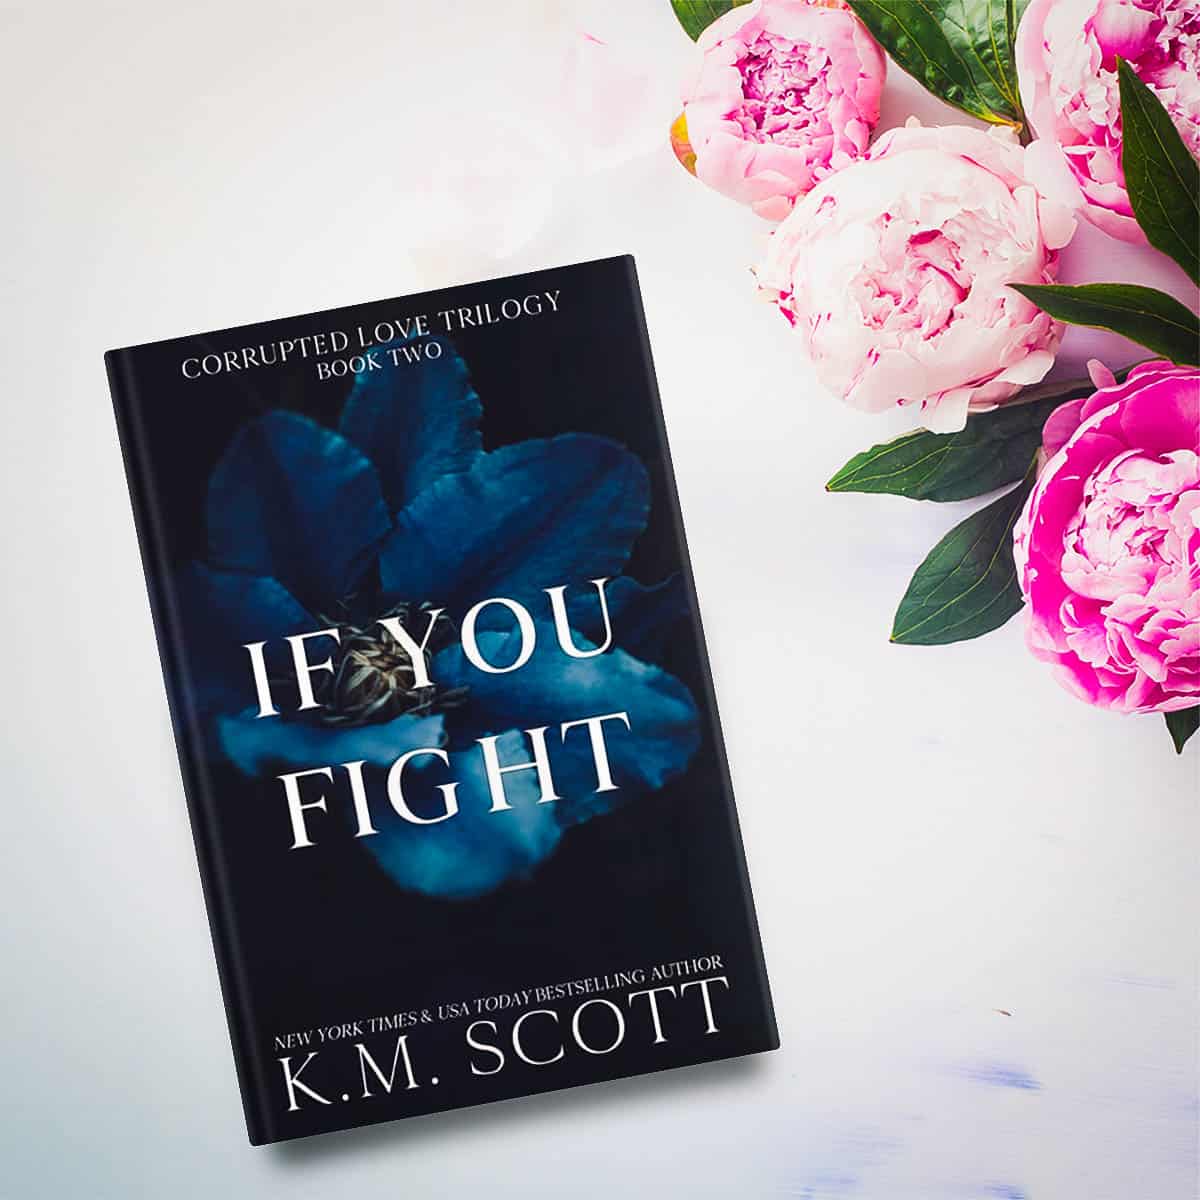 If You Fight by KM Scott is the second book in the Corrupted Love trilogy. I thought the first book was twisty-turny, but I was wrong. So wrong!